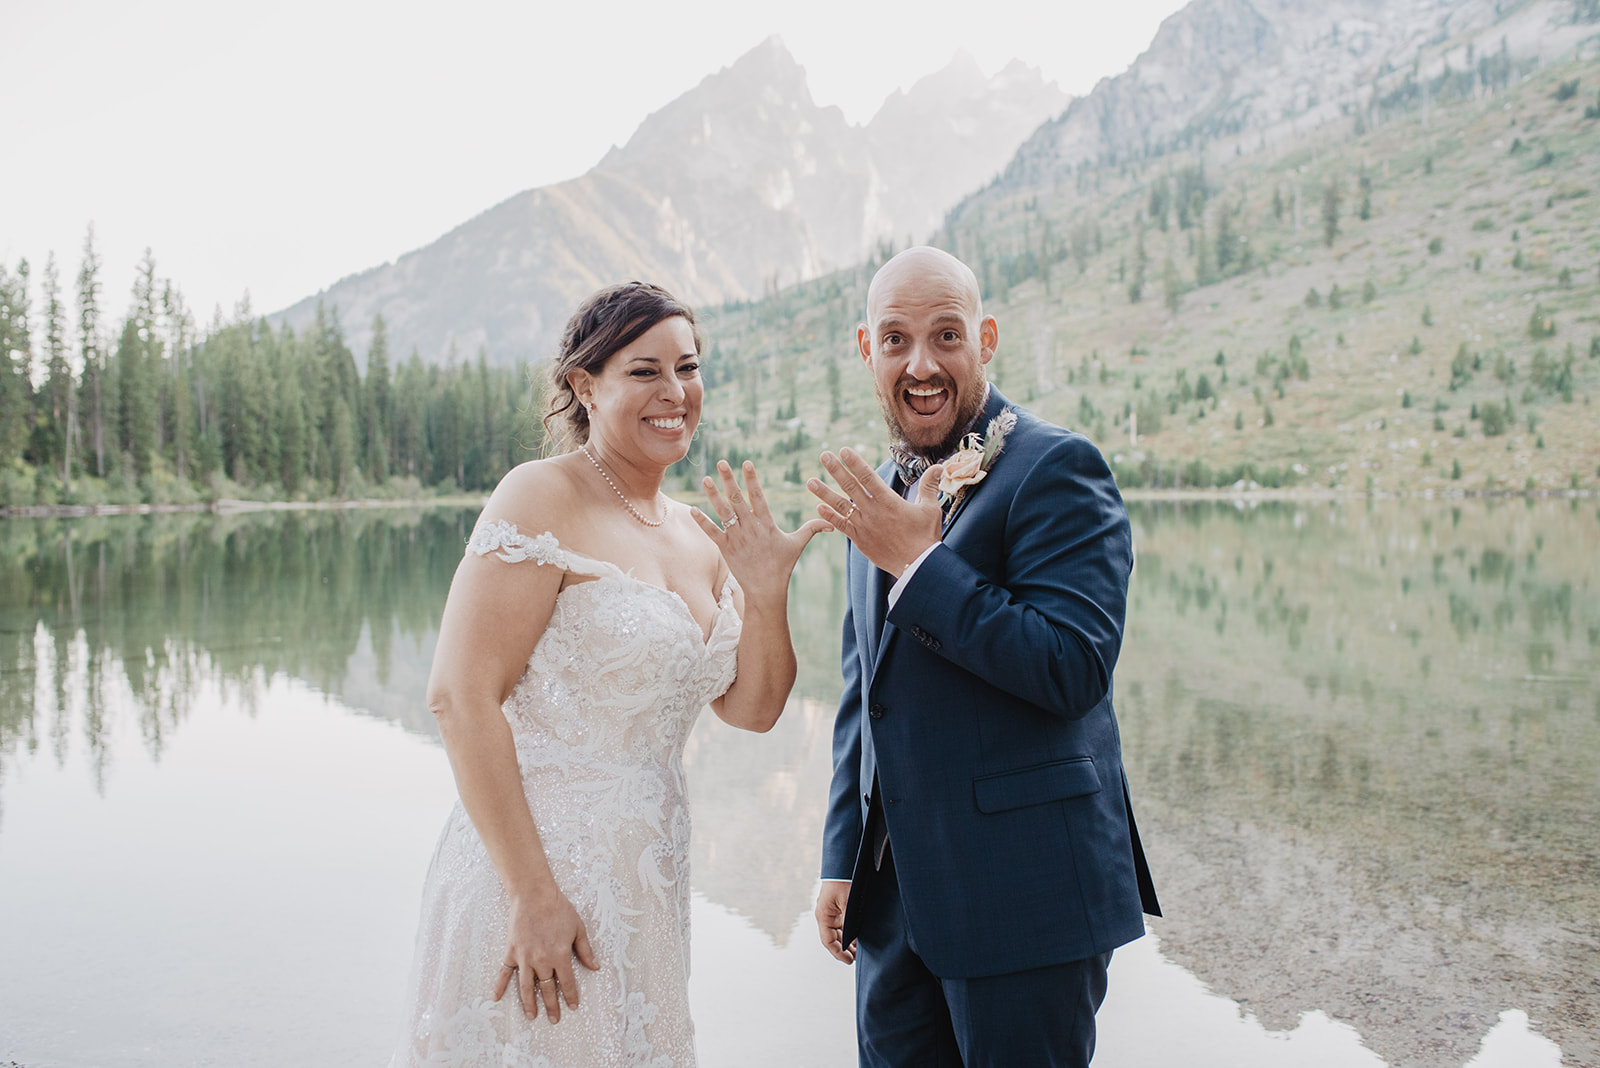 fun wedding photos in Jackson Hole with bride and groom holdin gup their hands to show their wedding rings on their Jackson Hole wedding day